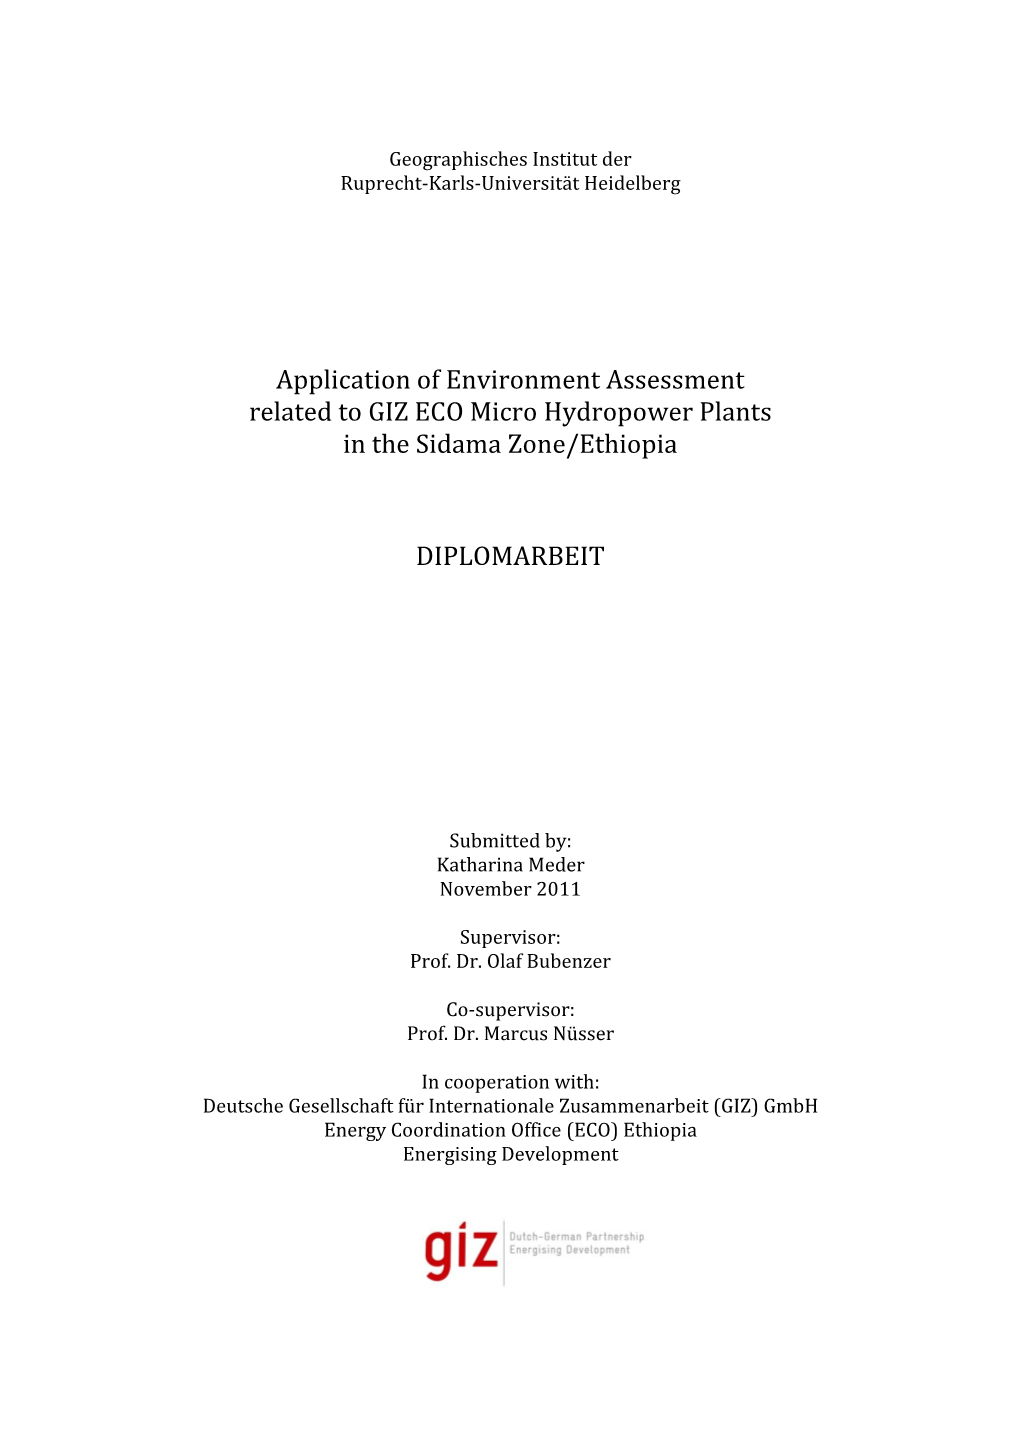 Application of Environment Assessment Related to GIZ ECO Micro Hydropower Plants in the Sidama Zone/Ethiopia